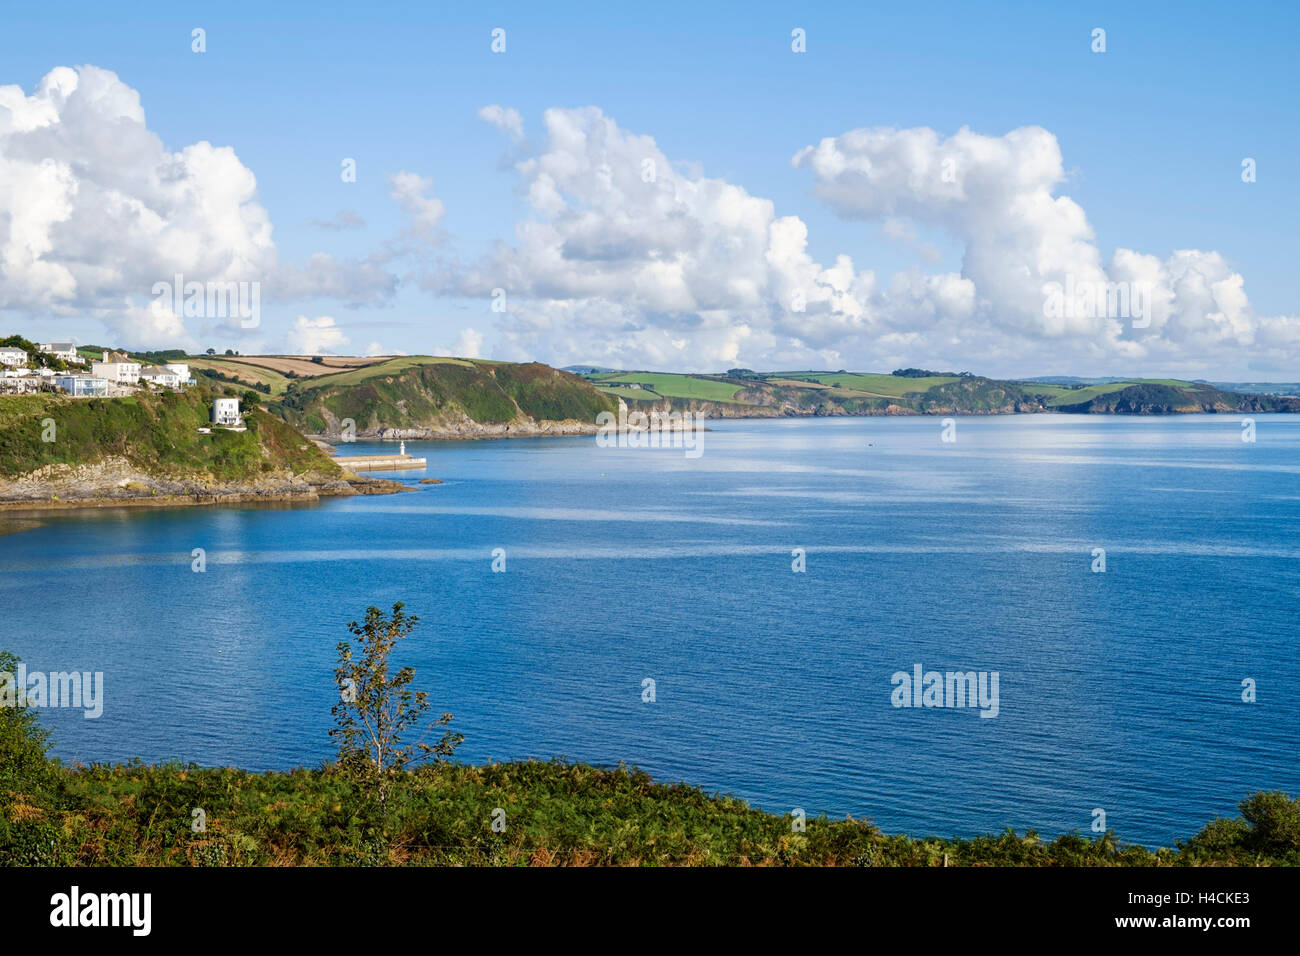 View from the South West Coast Path looking towards Mevagissey, Cornish coastline, Cornwall, England, United Kingdom Stock Photo